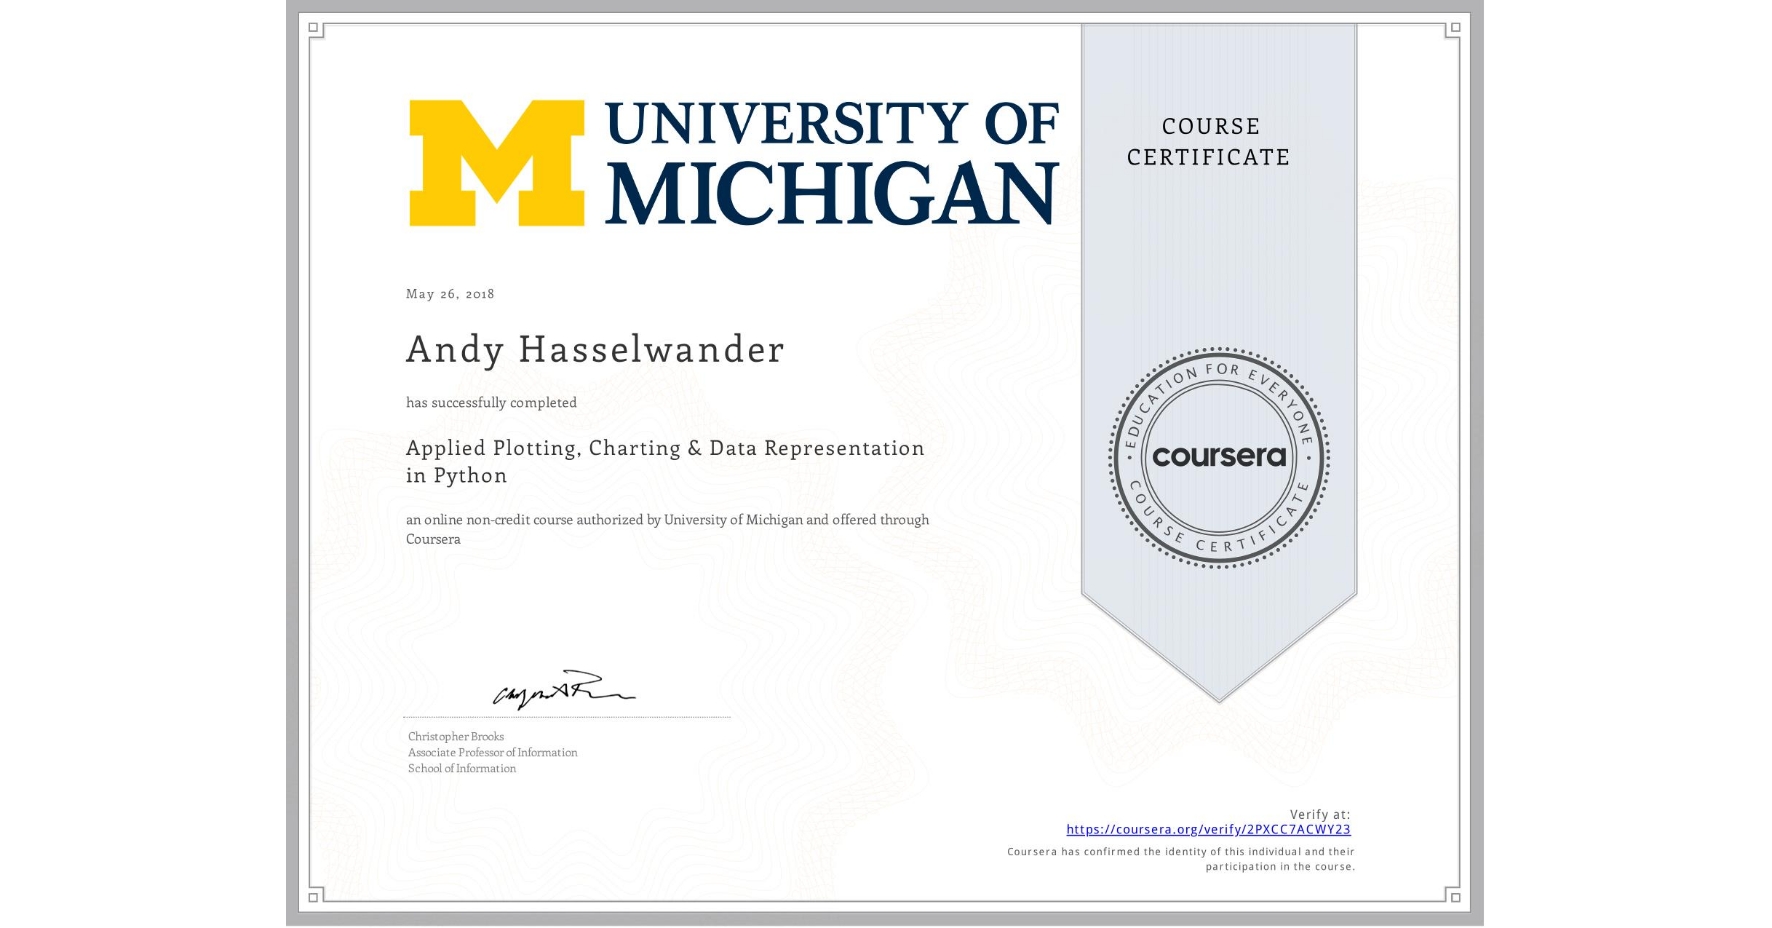 View certificate for Andy Hasselwander, Applied Plotting, Charting & Data Representation in Python, an online non-credit course authorized by University of Michigan and offered through Coursera